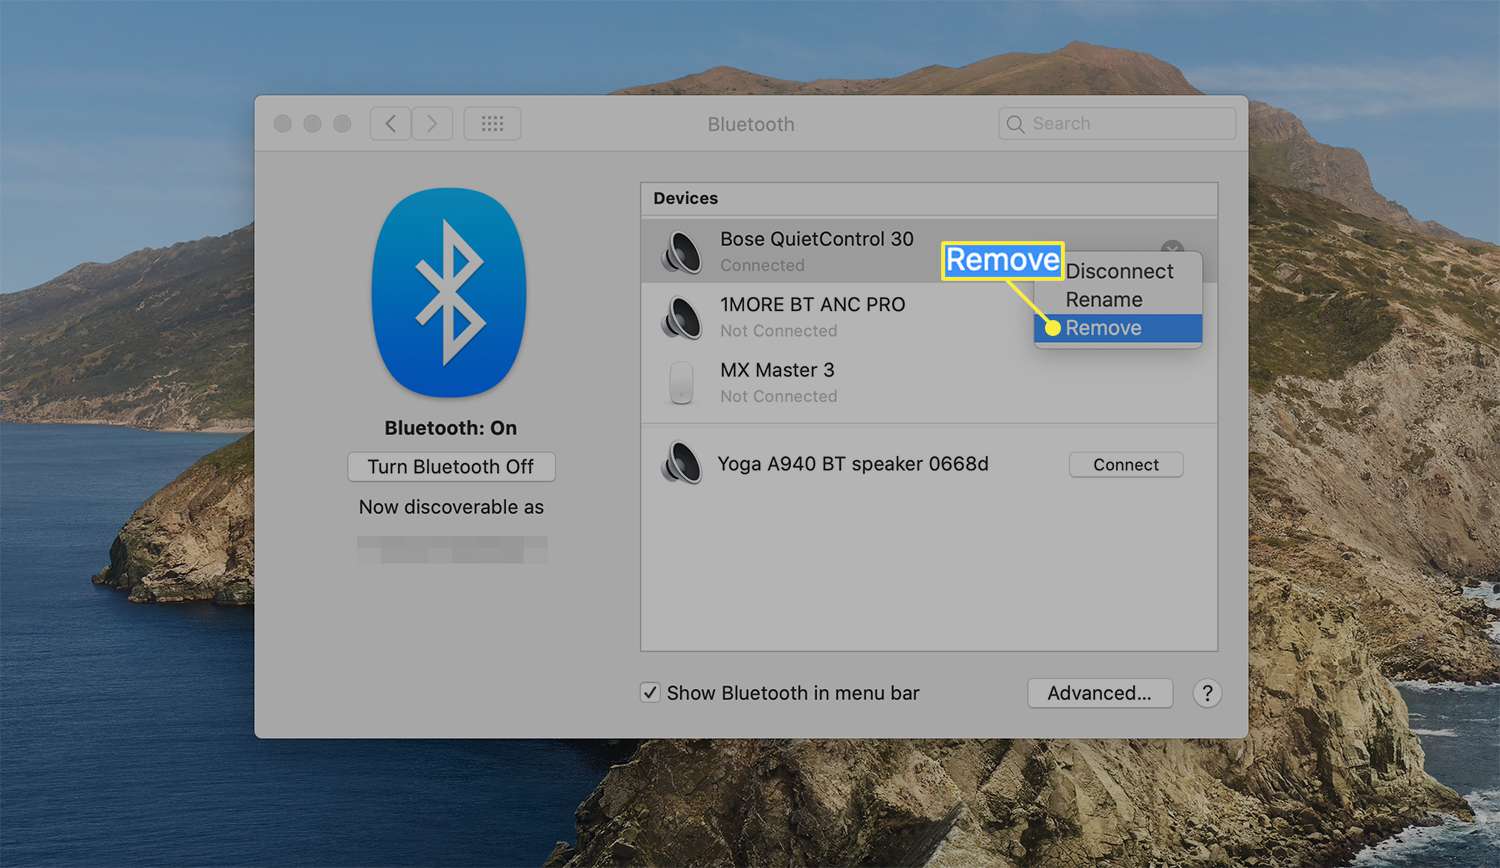 Remove option to unpair a device from macOS Bluetooth preferences